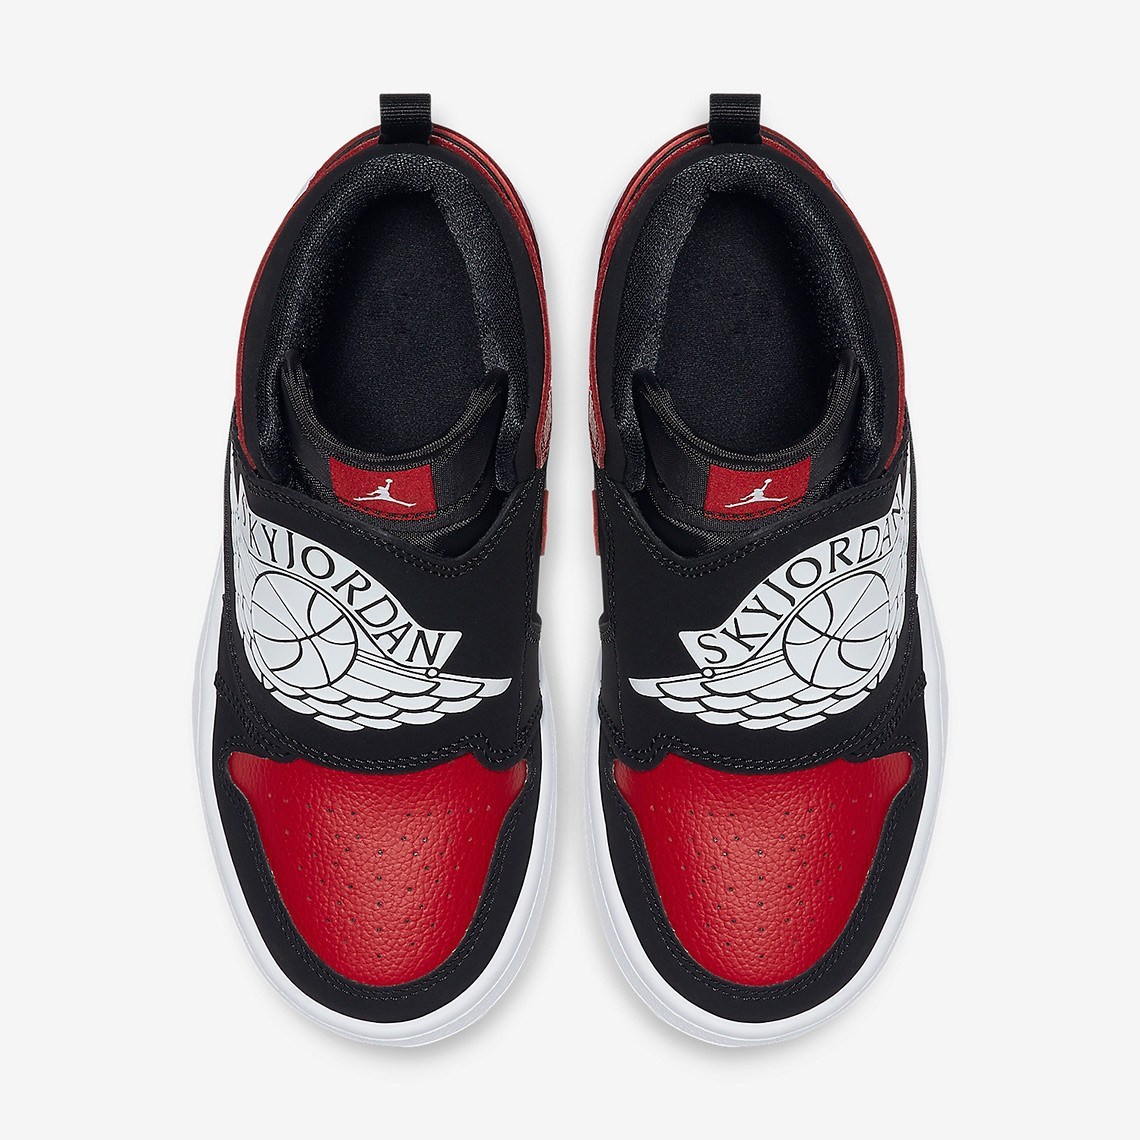 The Black and Red and the Royal Air Jordan is returning, but not how ...